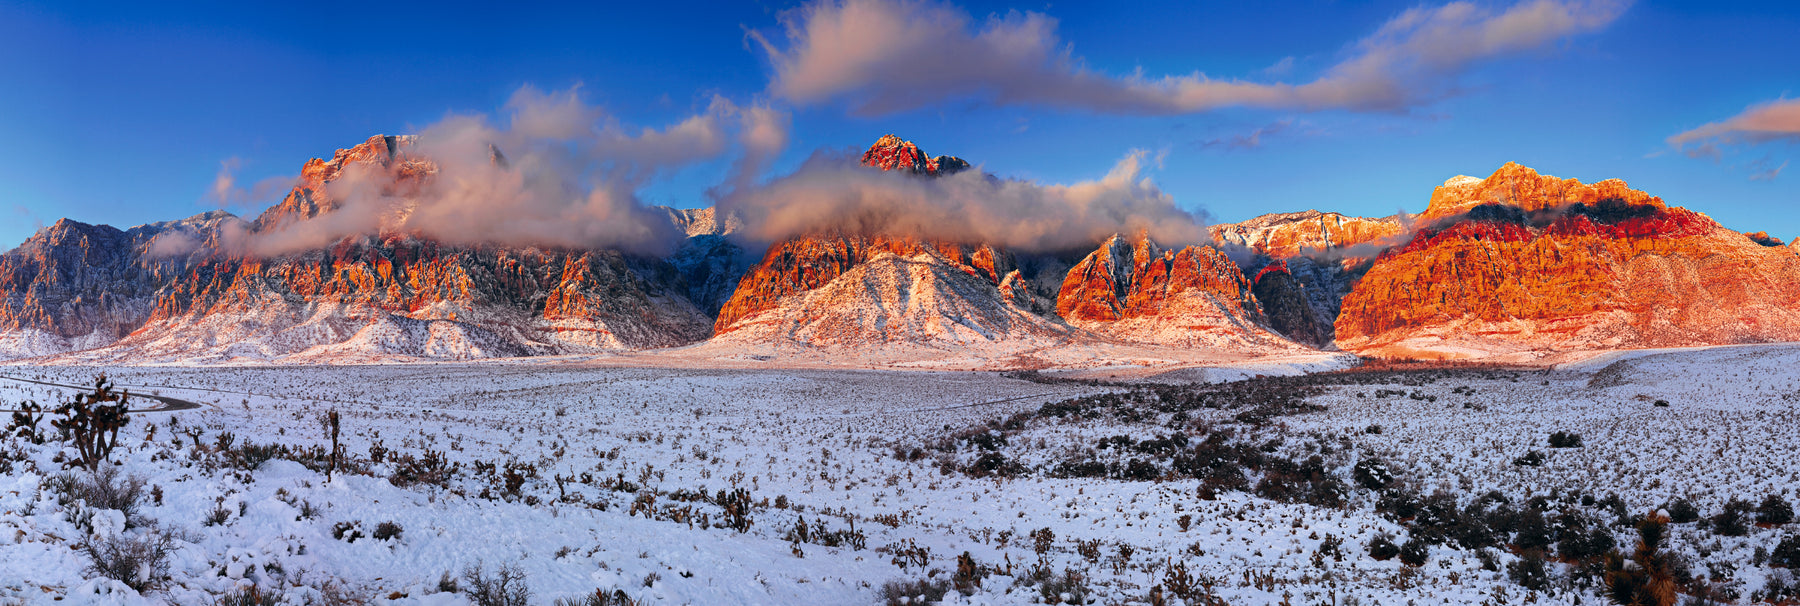 Clouds in front of the snow covered mountains and desert of Red Rock Canyon Nevada